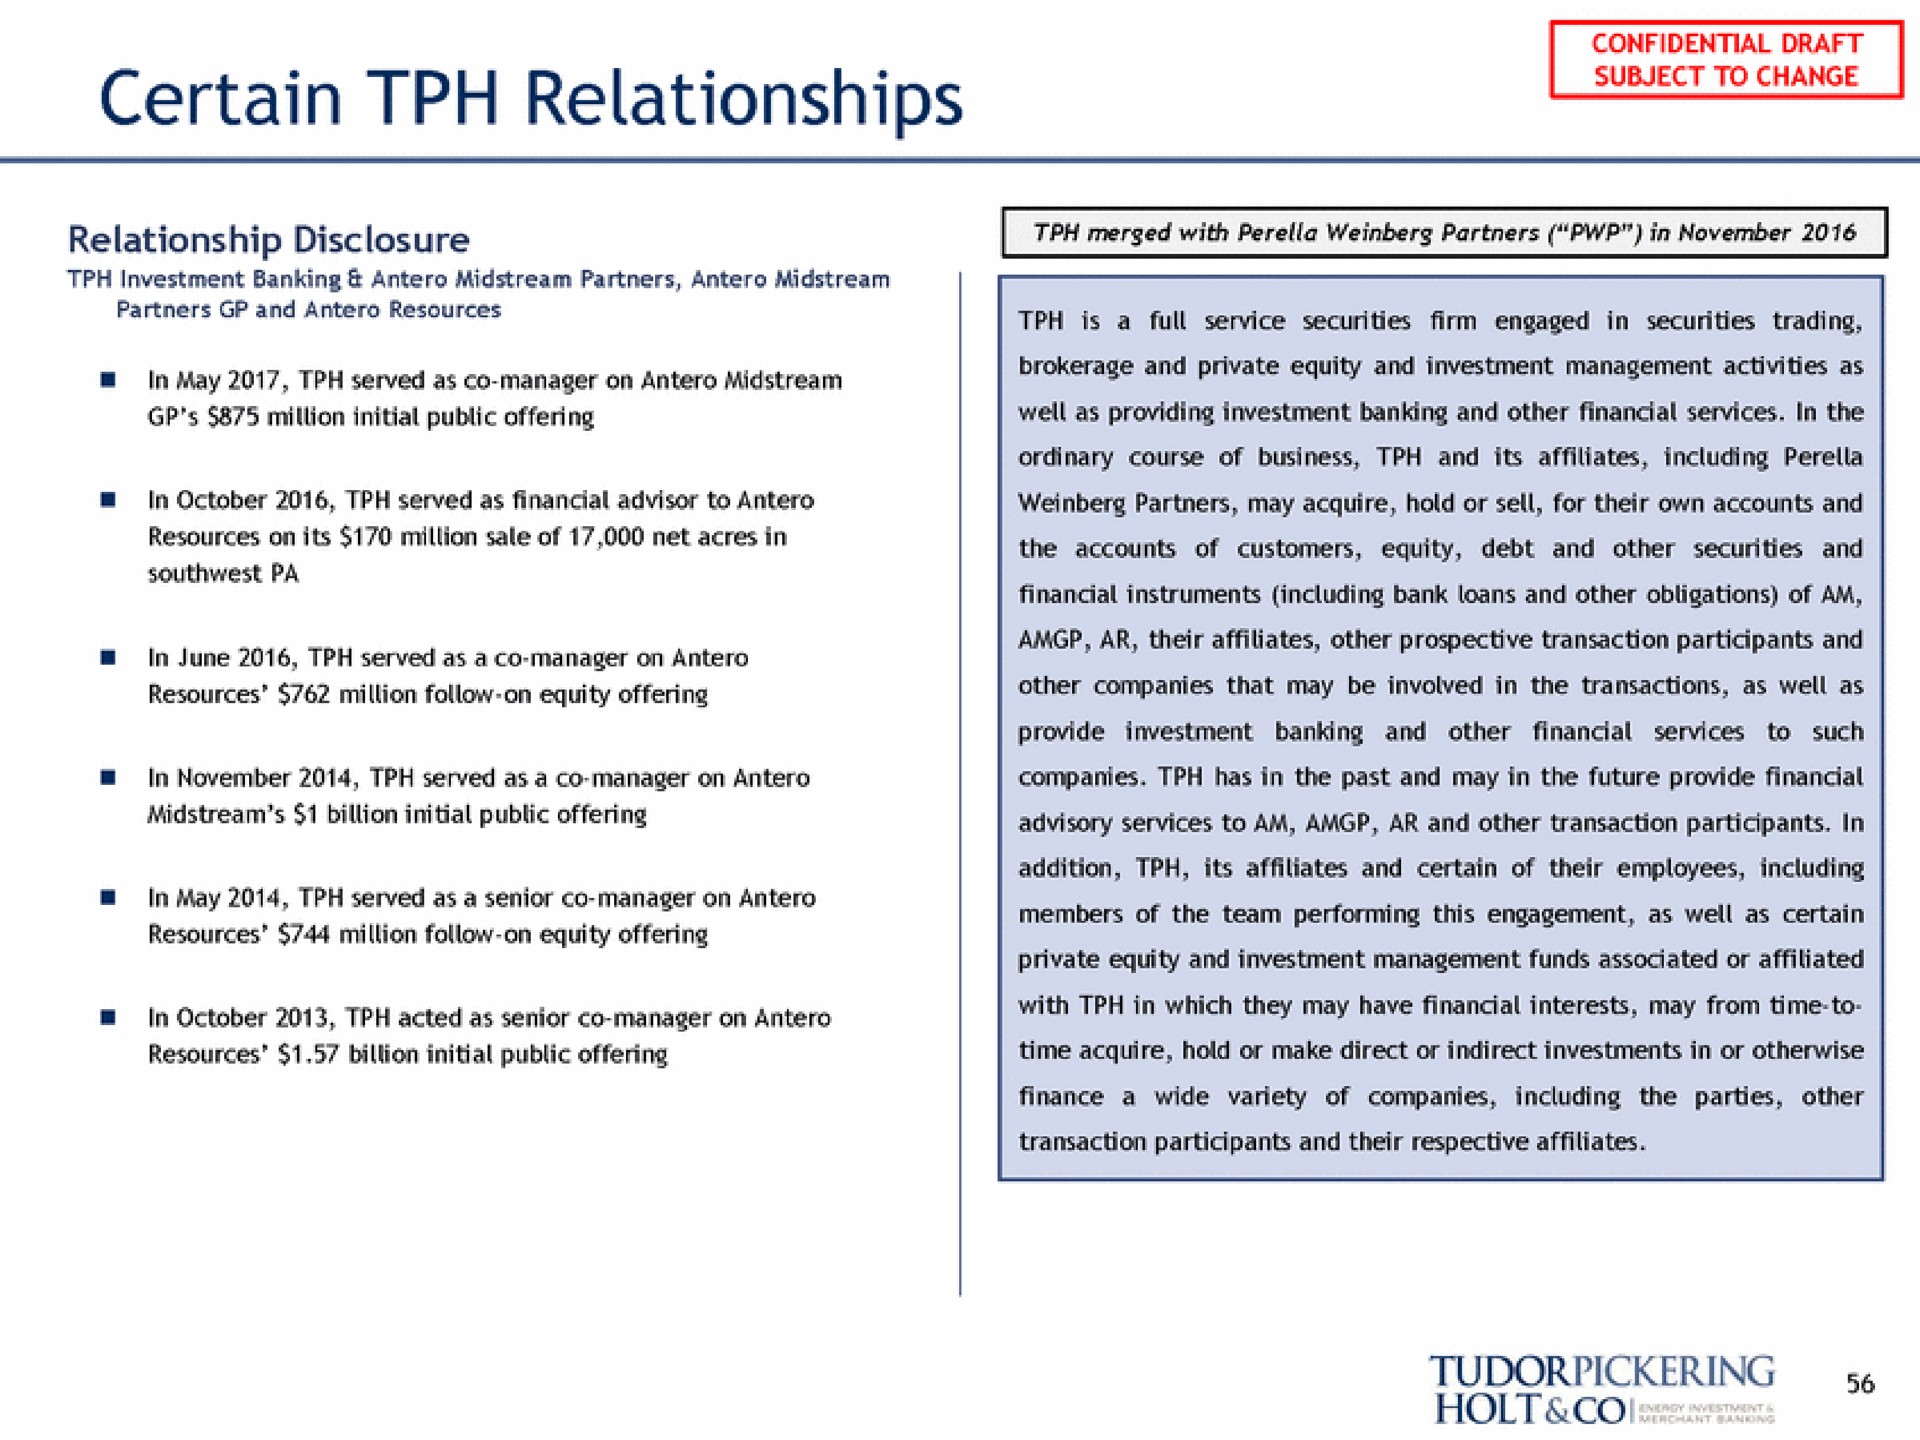 certain relationships confidential draft subject to change holt | Tudor, Pickering, Holt & Co